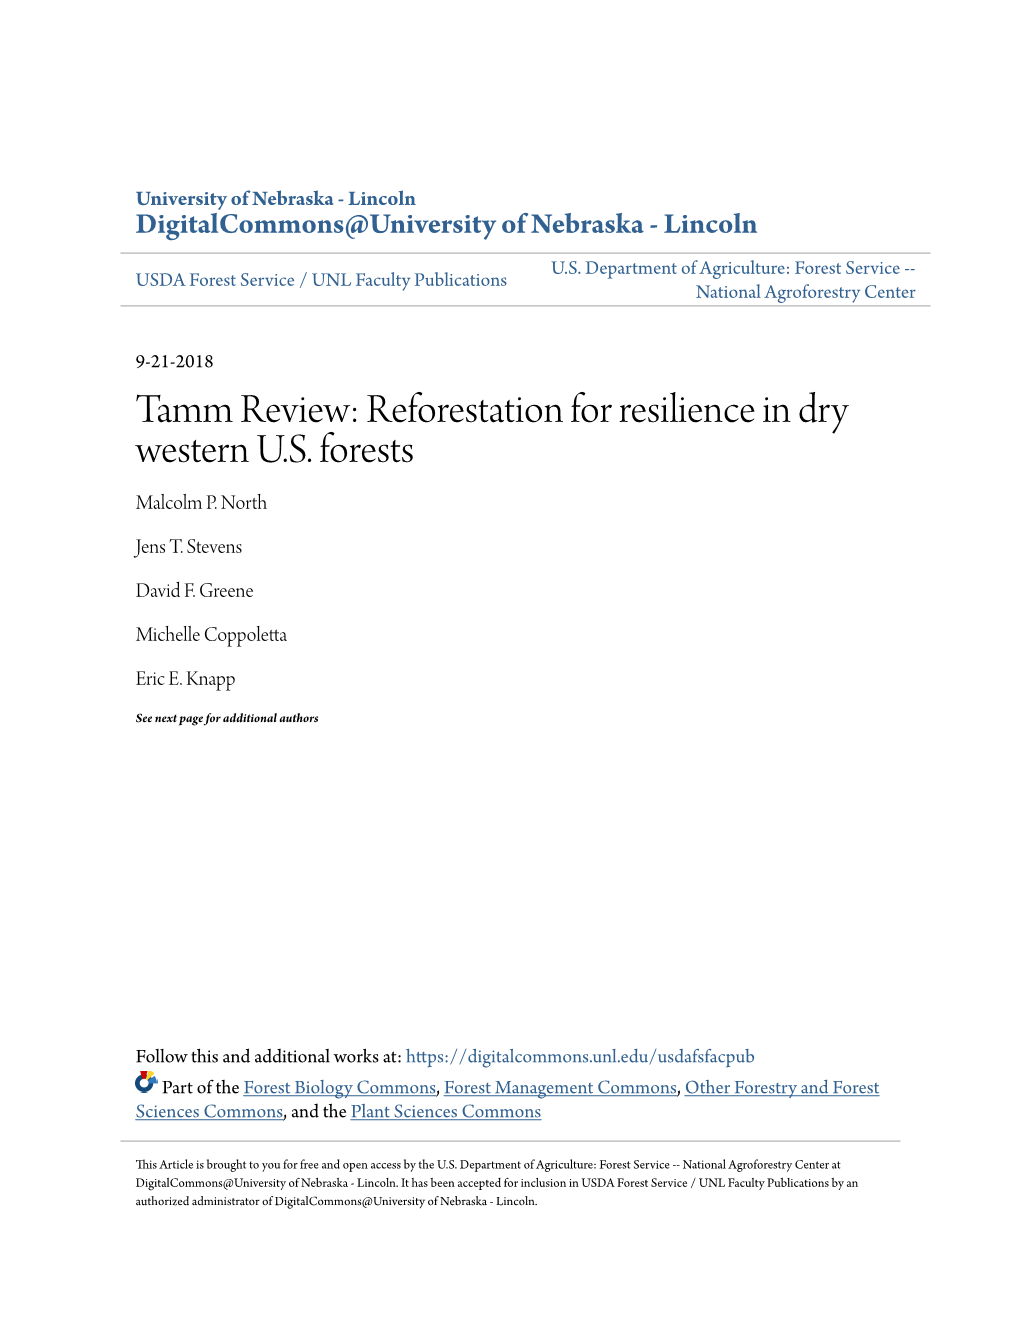 Tamm Review: Reforestation for Resilience in Dry Western U.S. Forests Malcolm P